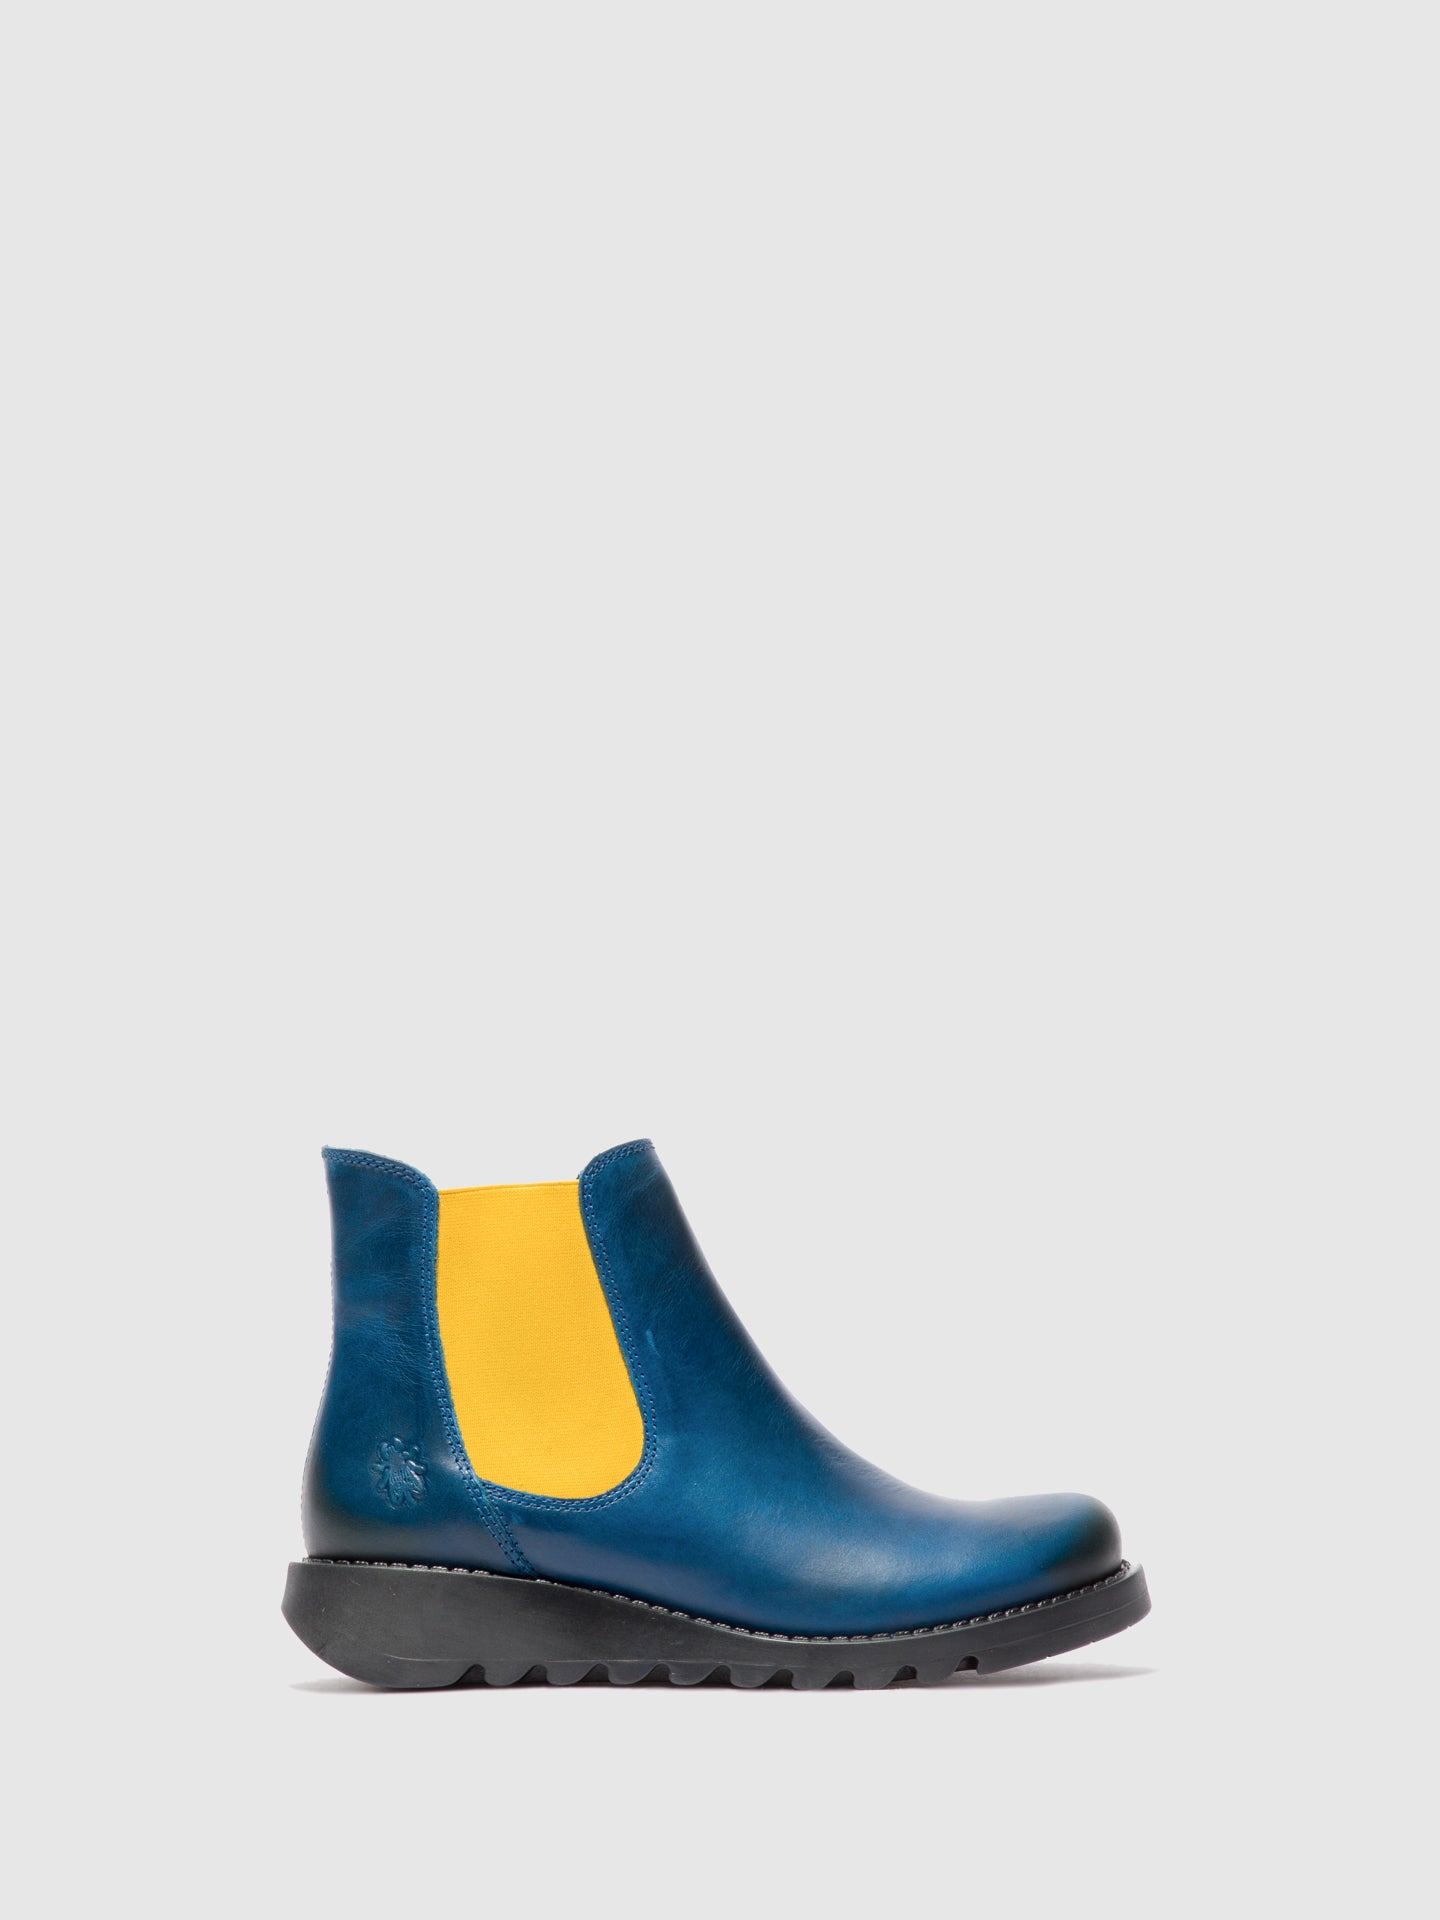 Fly London Chelsea Ankle Boots SALV RUG ROYAL BLUE (MUSTARD ELASTIC)